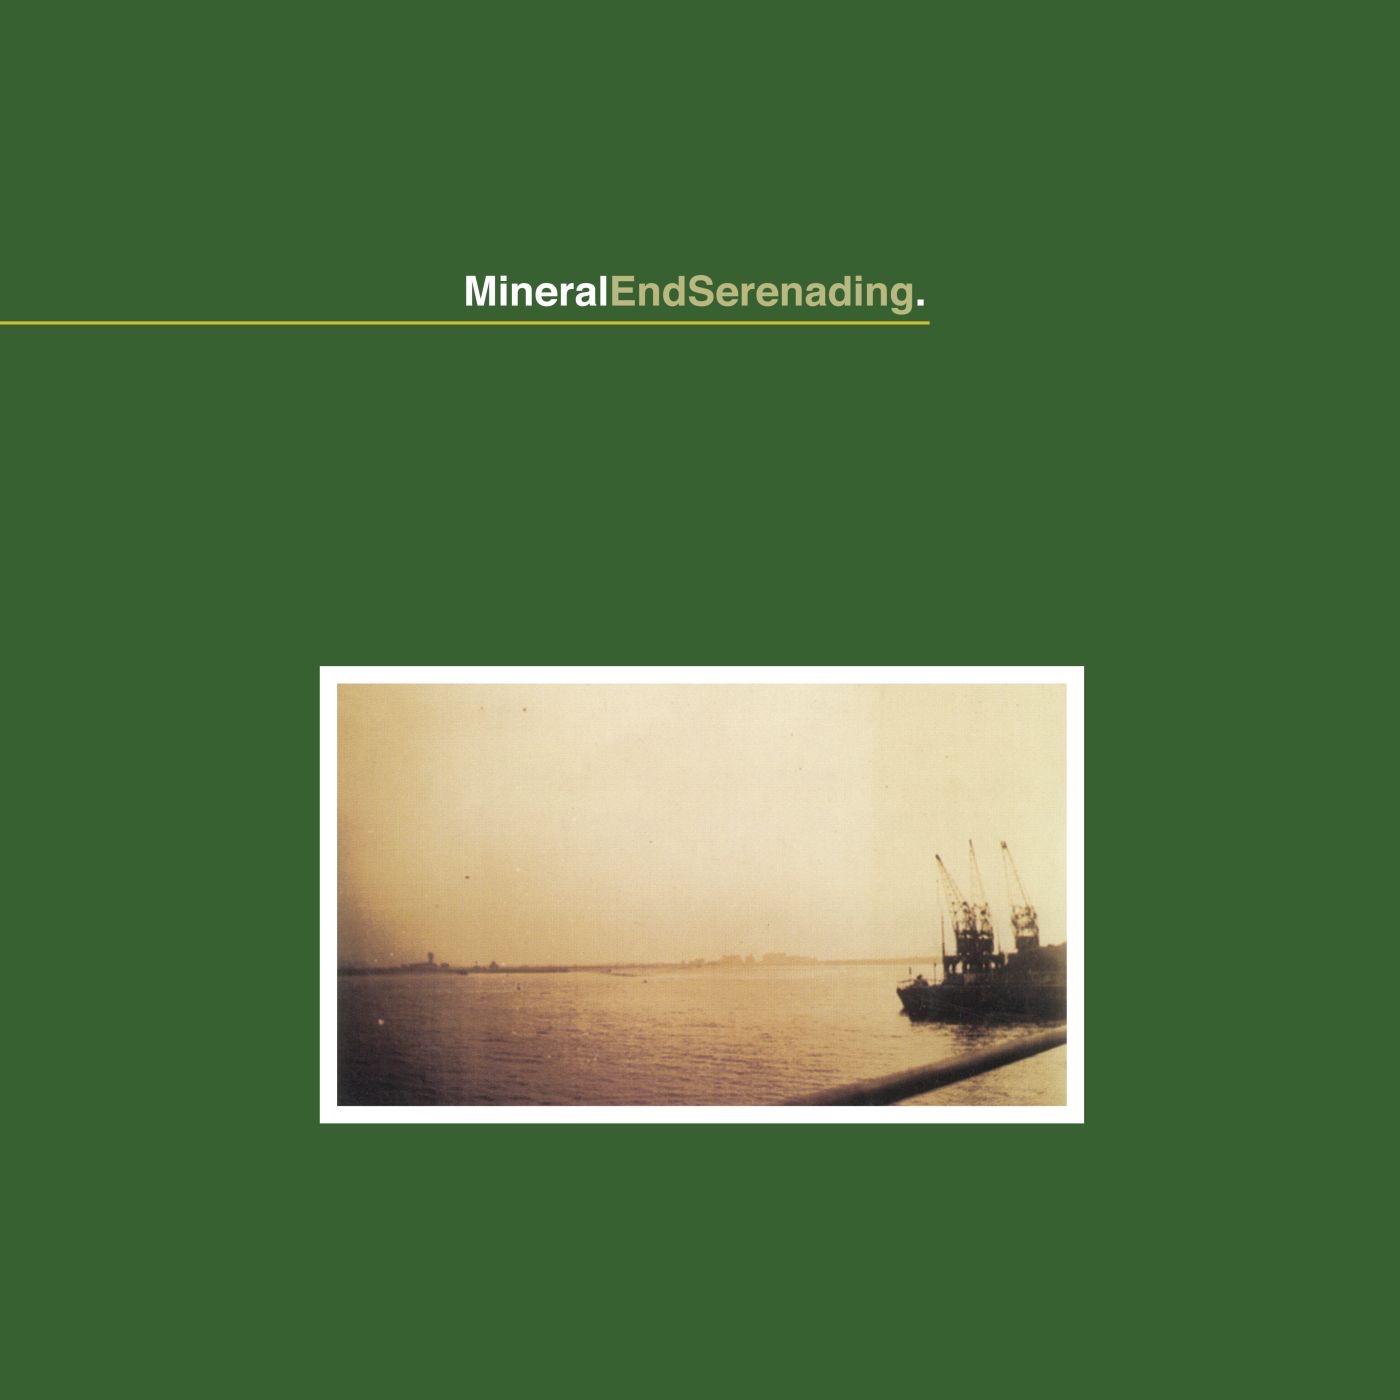 End Serenading by Mineral